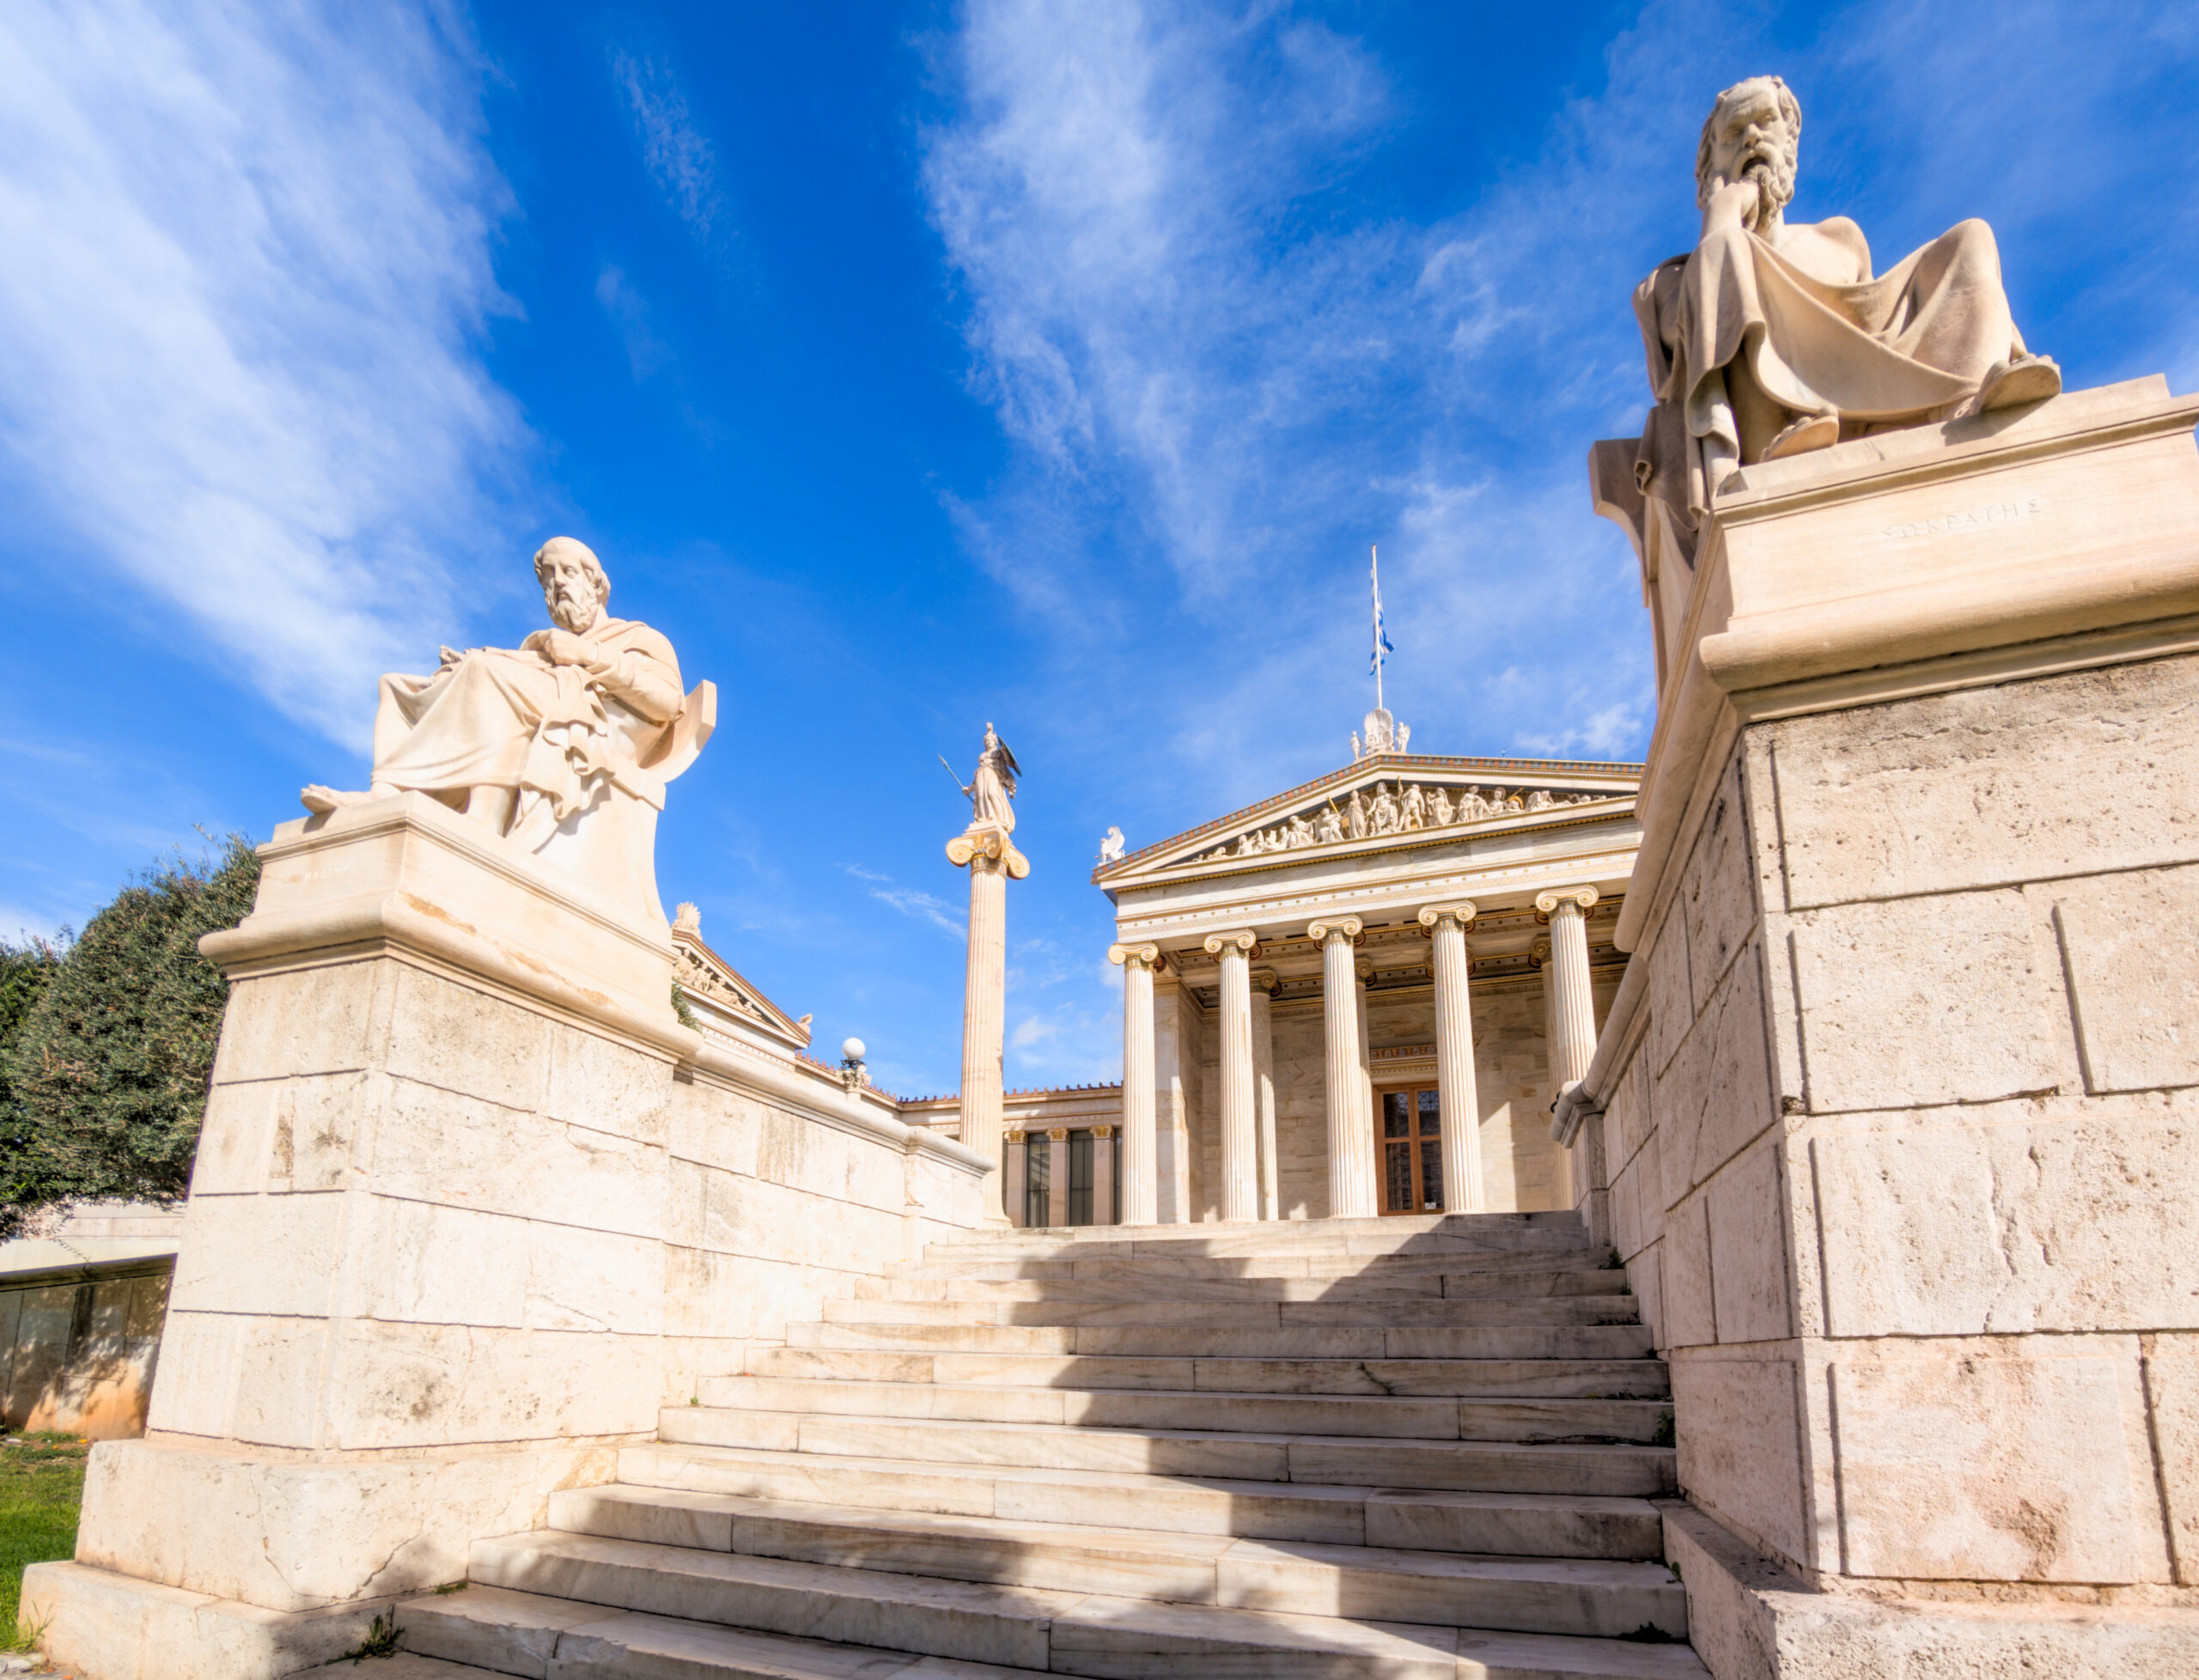 Large statues of the classical Greek philosophers Plato and Socrates at the Academy of Athens in the centre of the Greek Capital. The statues was completed in 1885 by Leonidas Drosis.